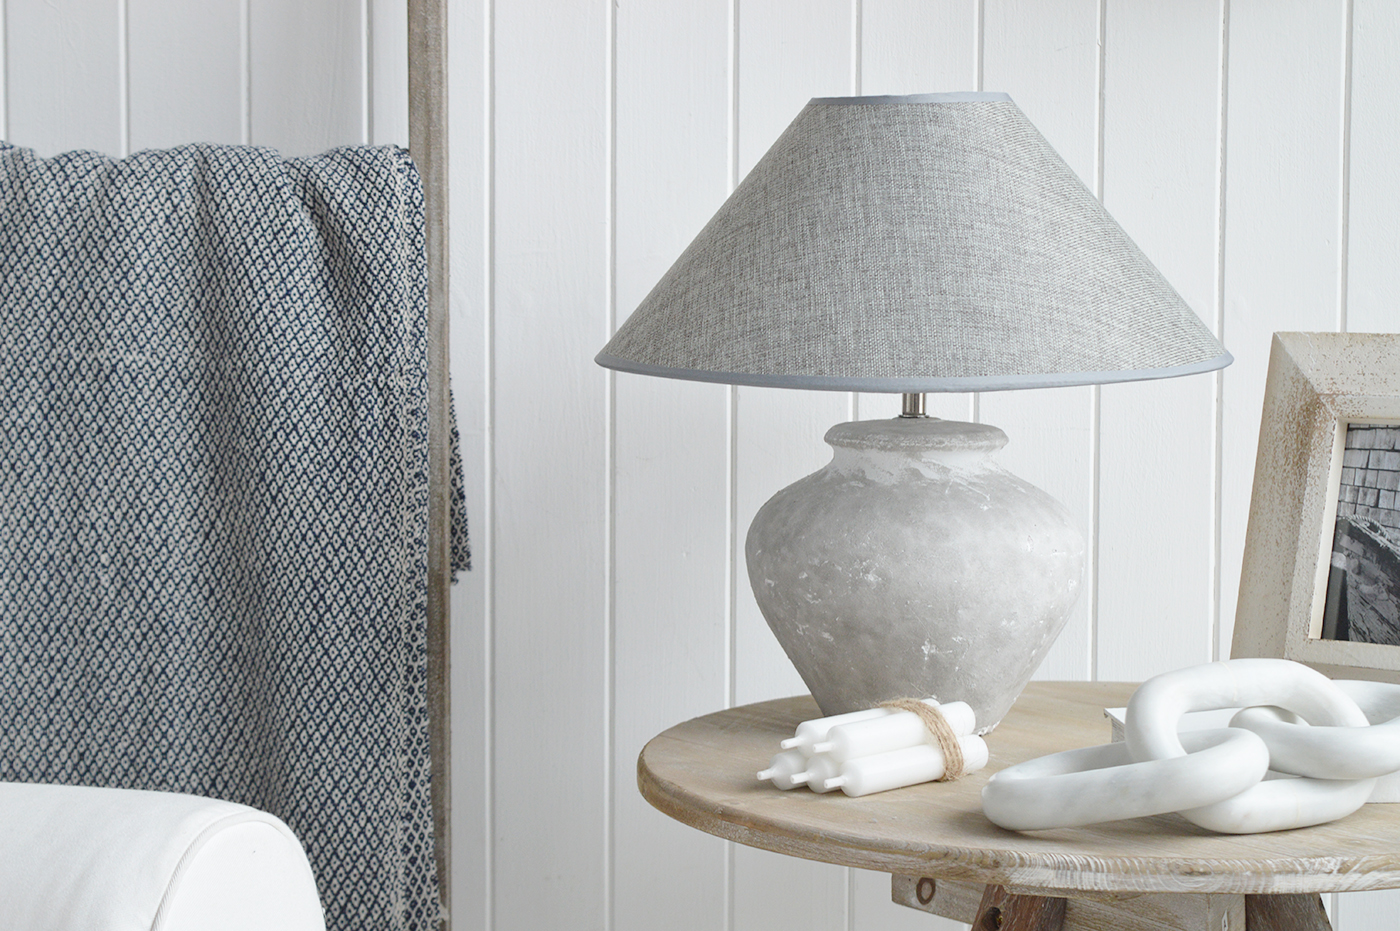 New England style lamps. Rockport Table Lamp - Coastal, Modern Farmhopuse and Country Furniture and Interiors